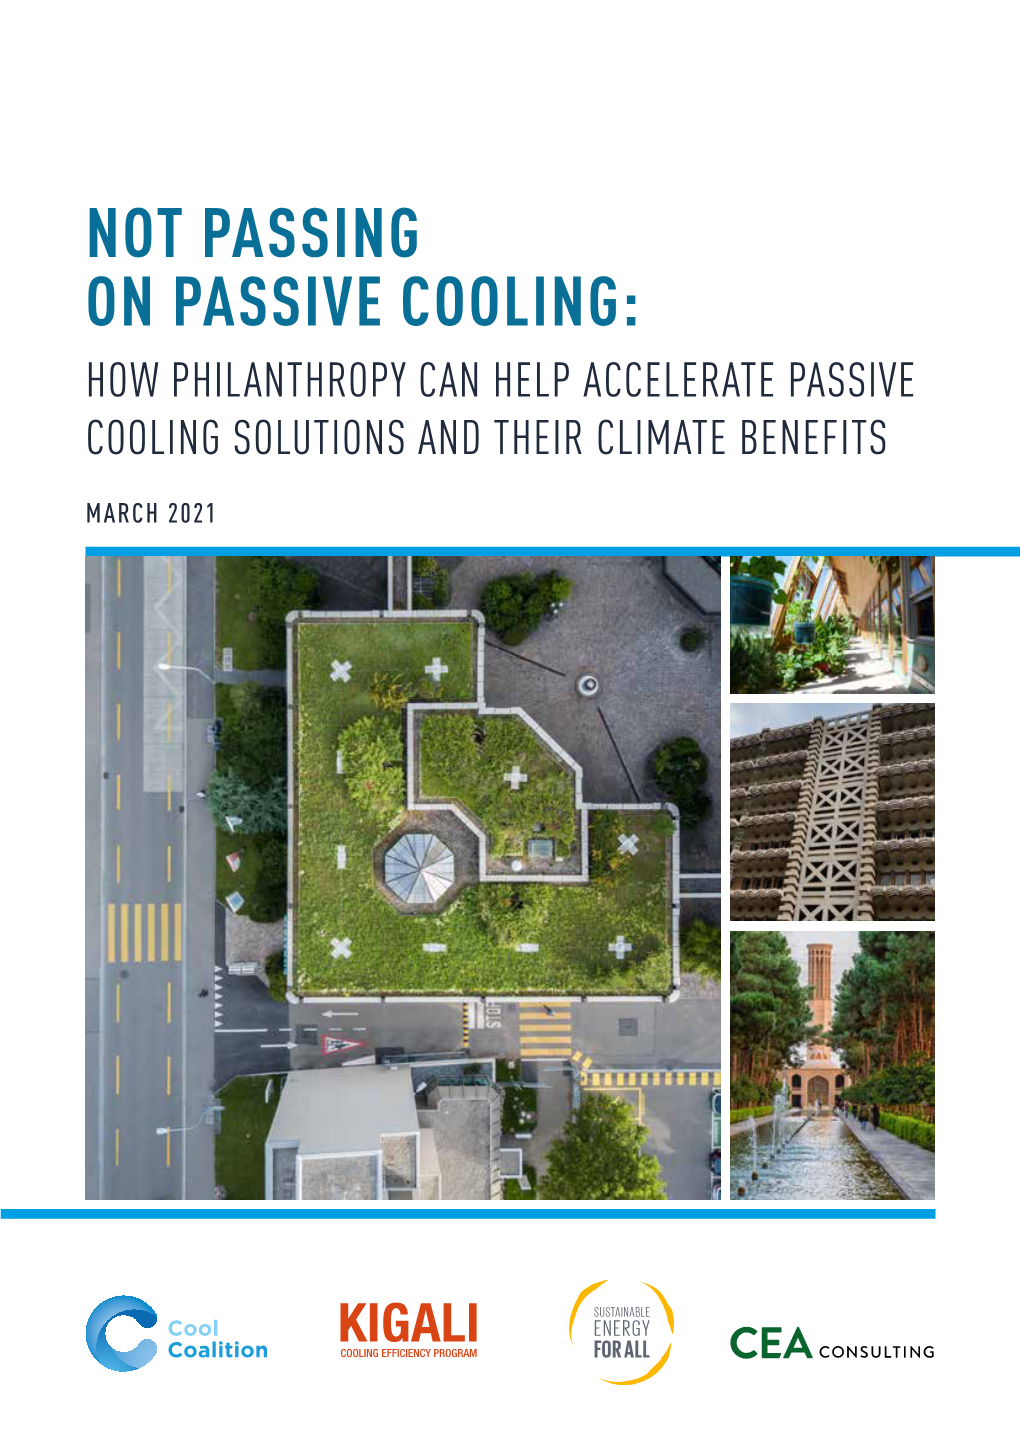 Not Passing on Passive Cooling: How Philanthropy Can Help Accelerate Passive Cooling Solutions and Their Climate Benefits